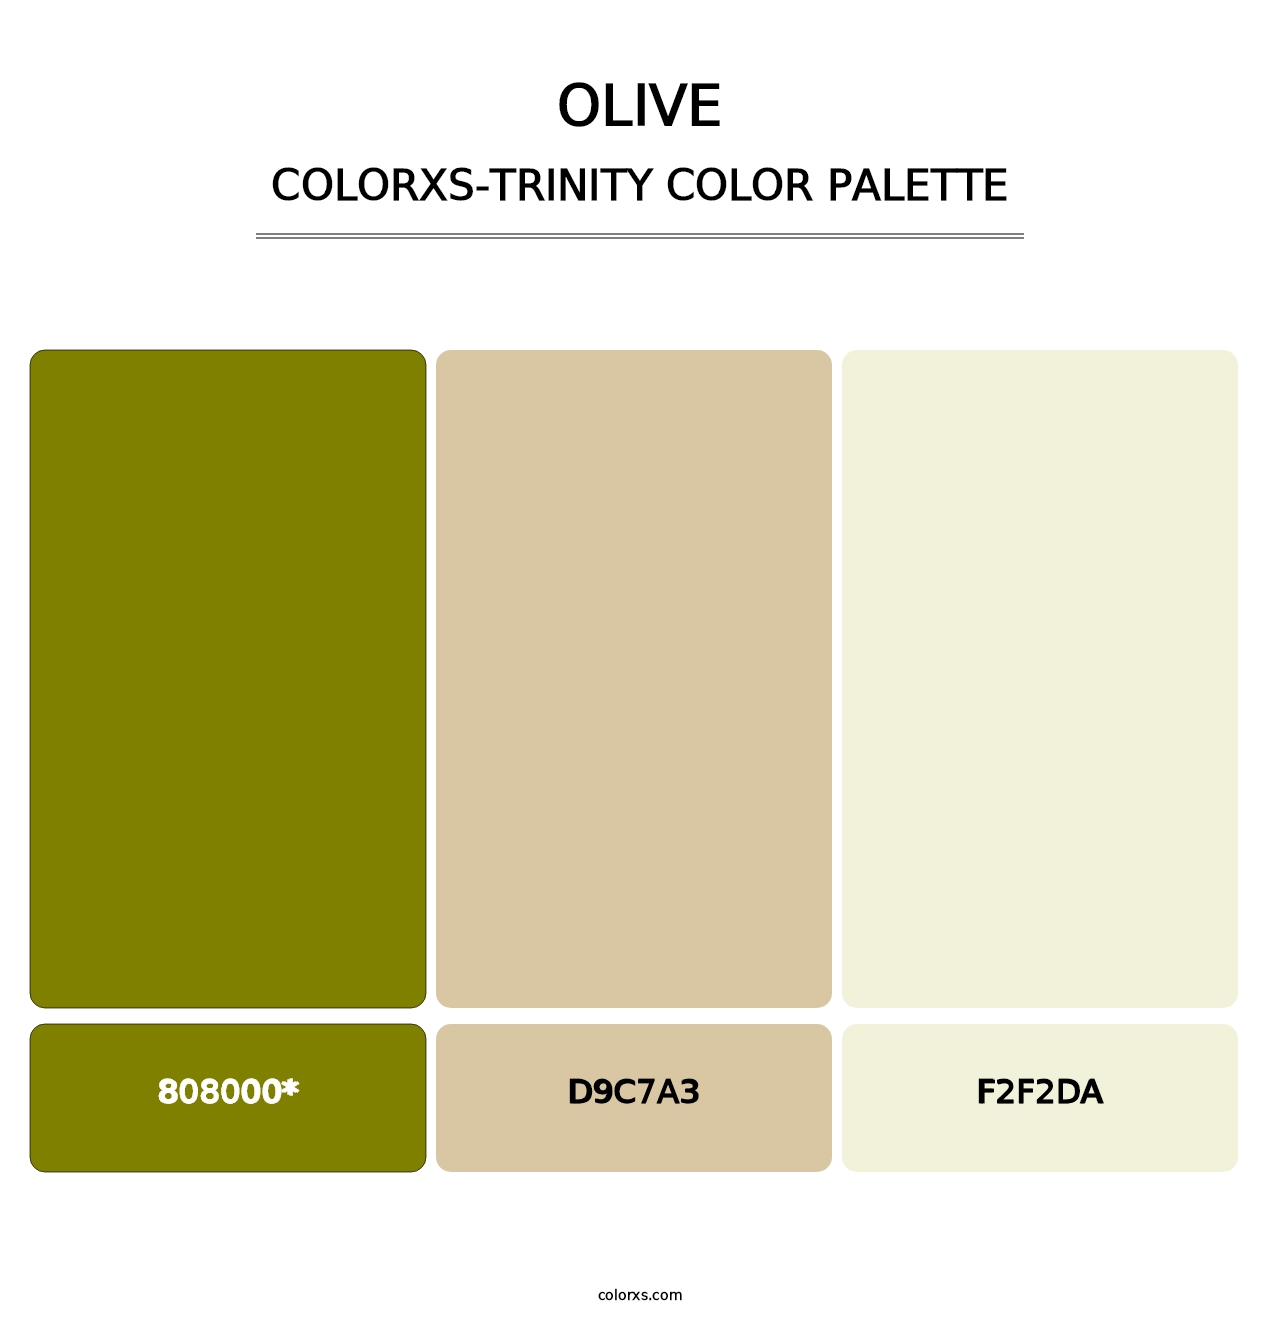 Olive - Colorxs Trinity Palette